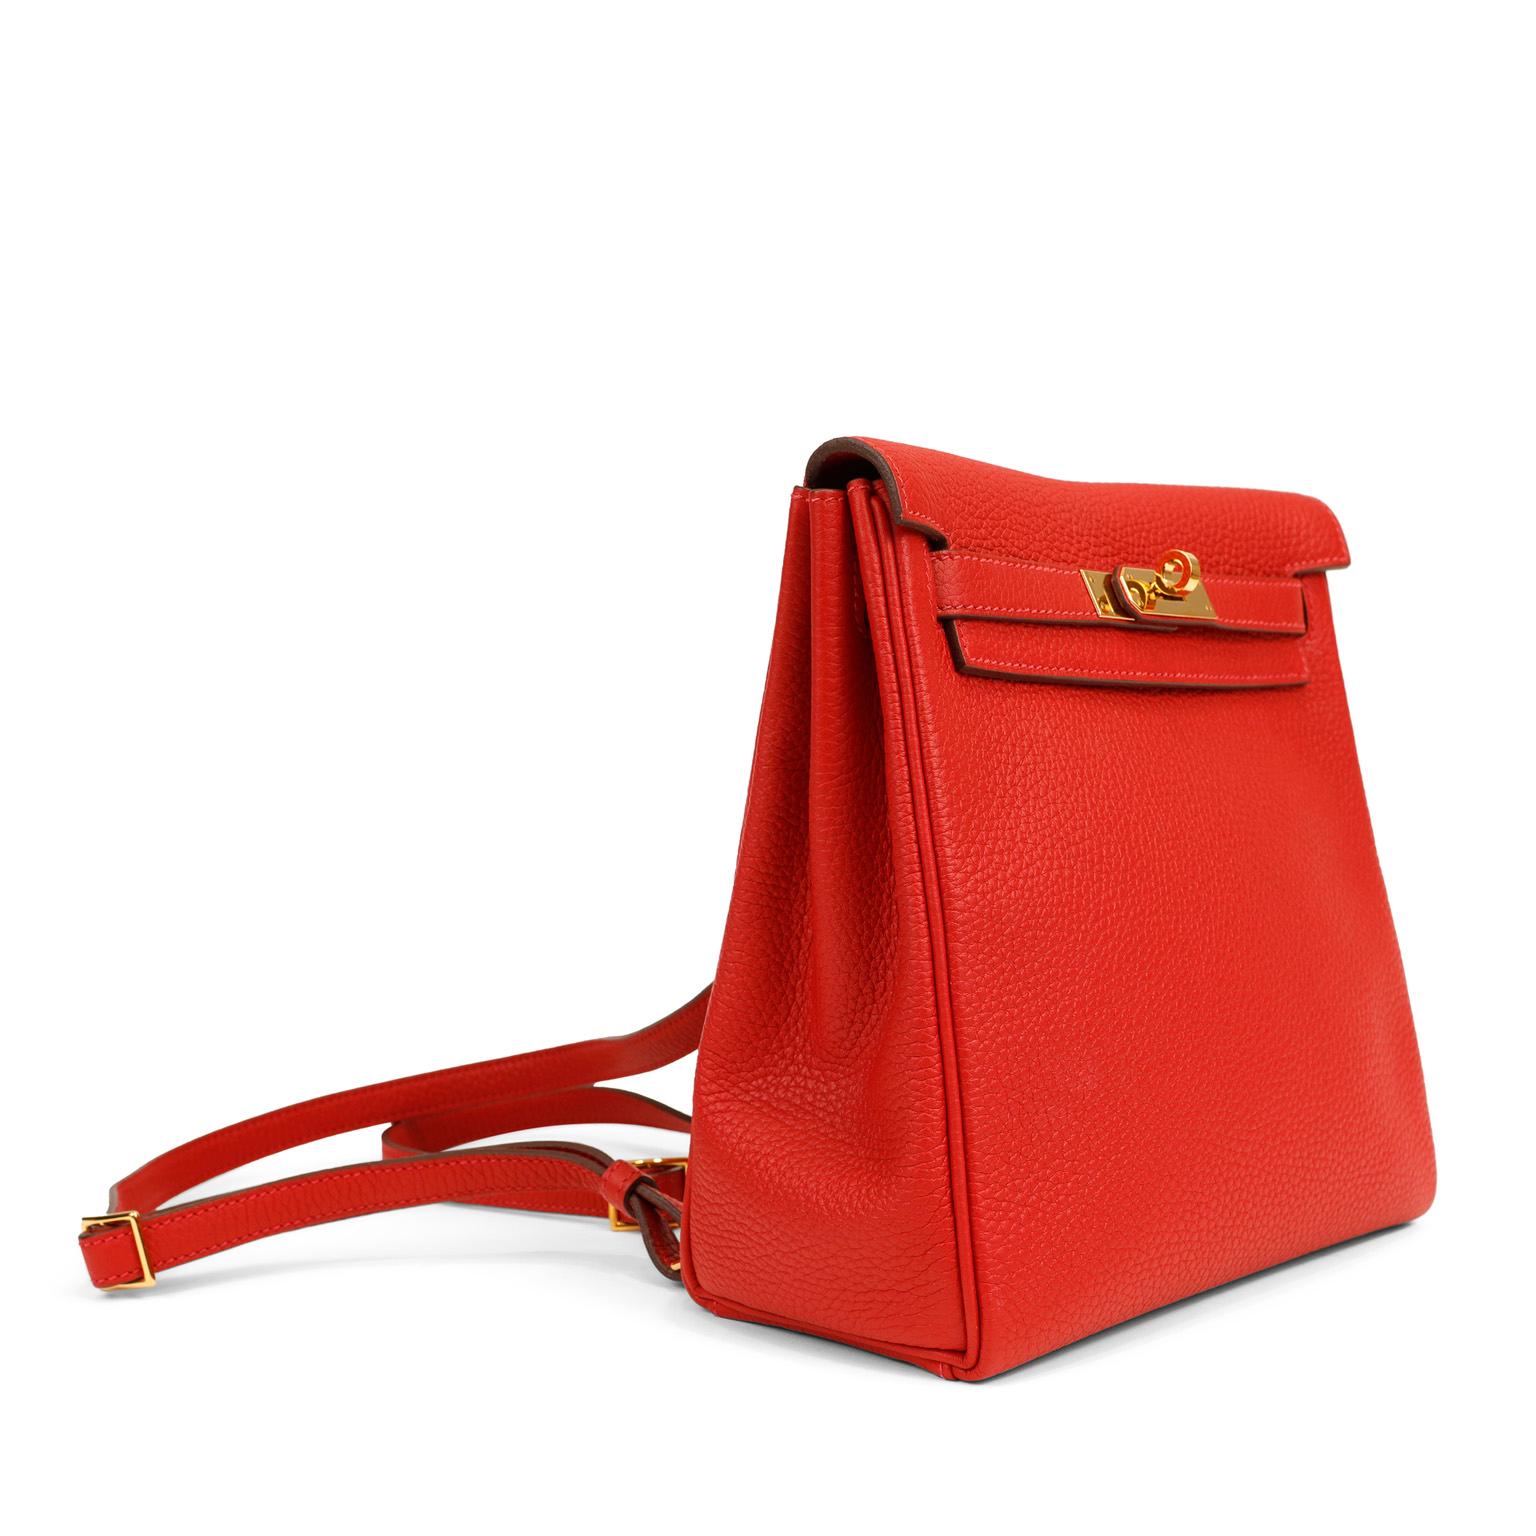 This authentic Hermès Red Clemence Kelly Backpack is in pristine condition.   The backpack silhouette relaxes the Kelly design elements in this casual hands free style.  
Lipstick red Clemence leather is textured and soft to the hand.  Made from the